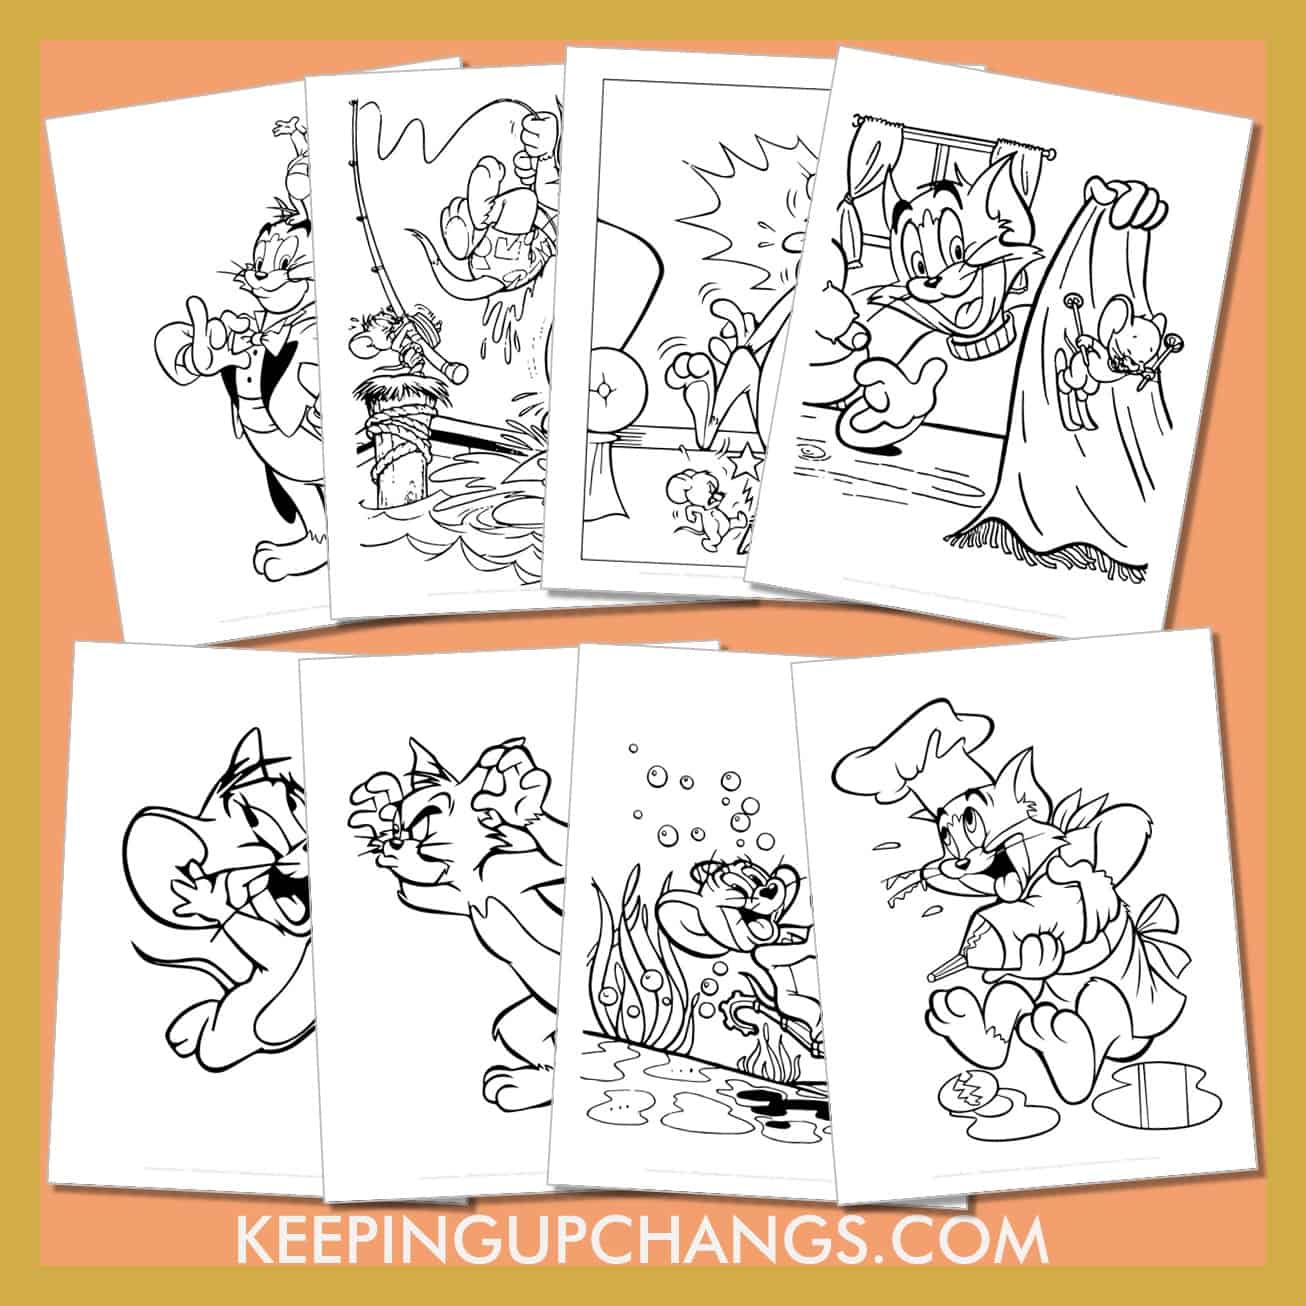 tom and jerry colouring sheets including beach, baking, christmas, spike, tyke, and more.